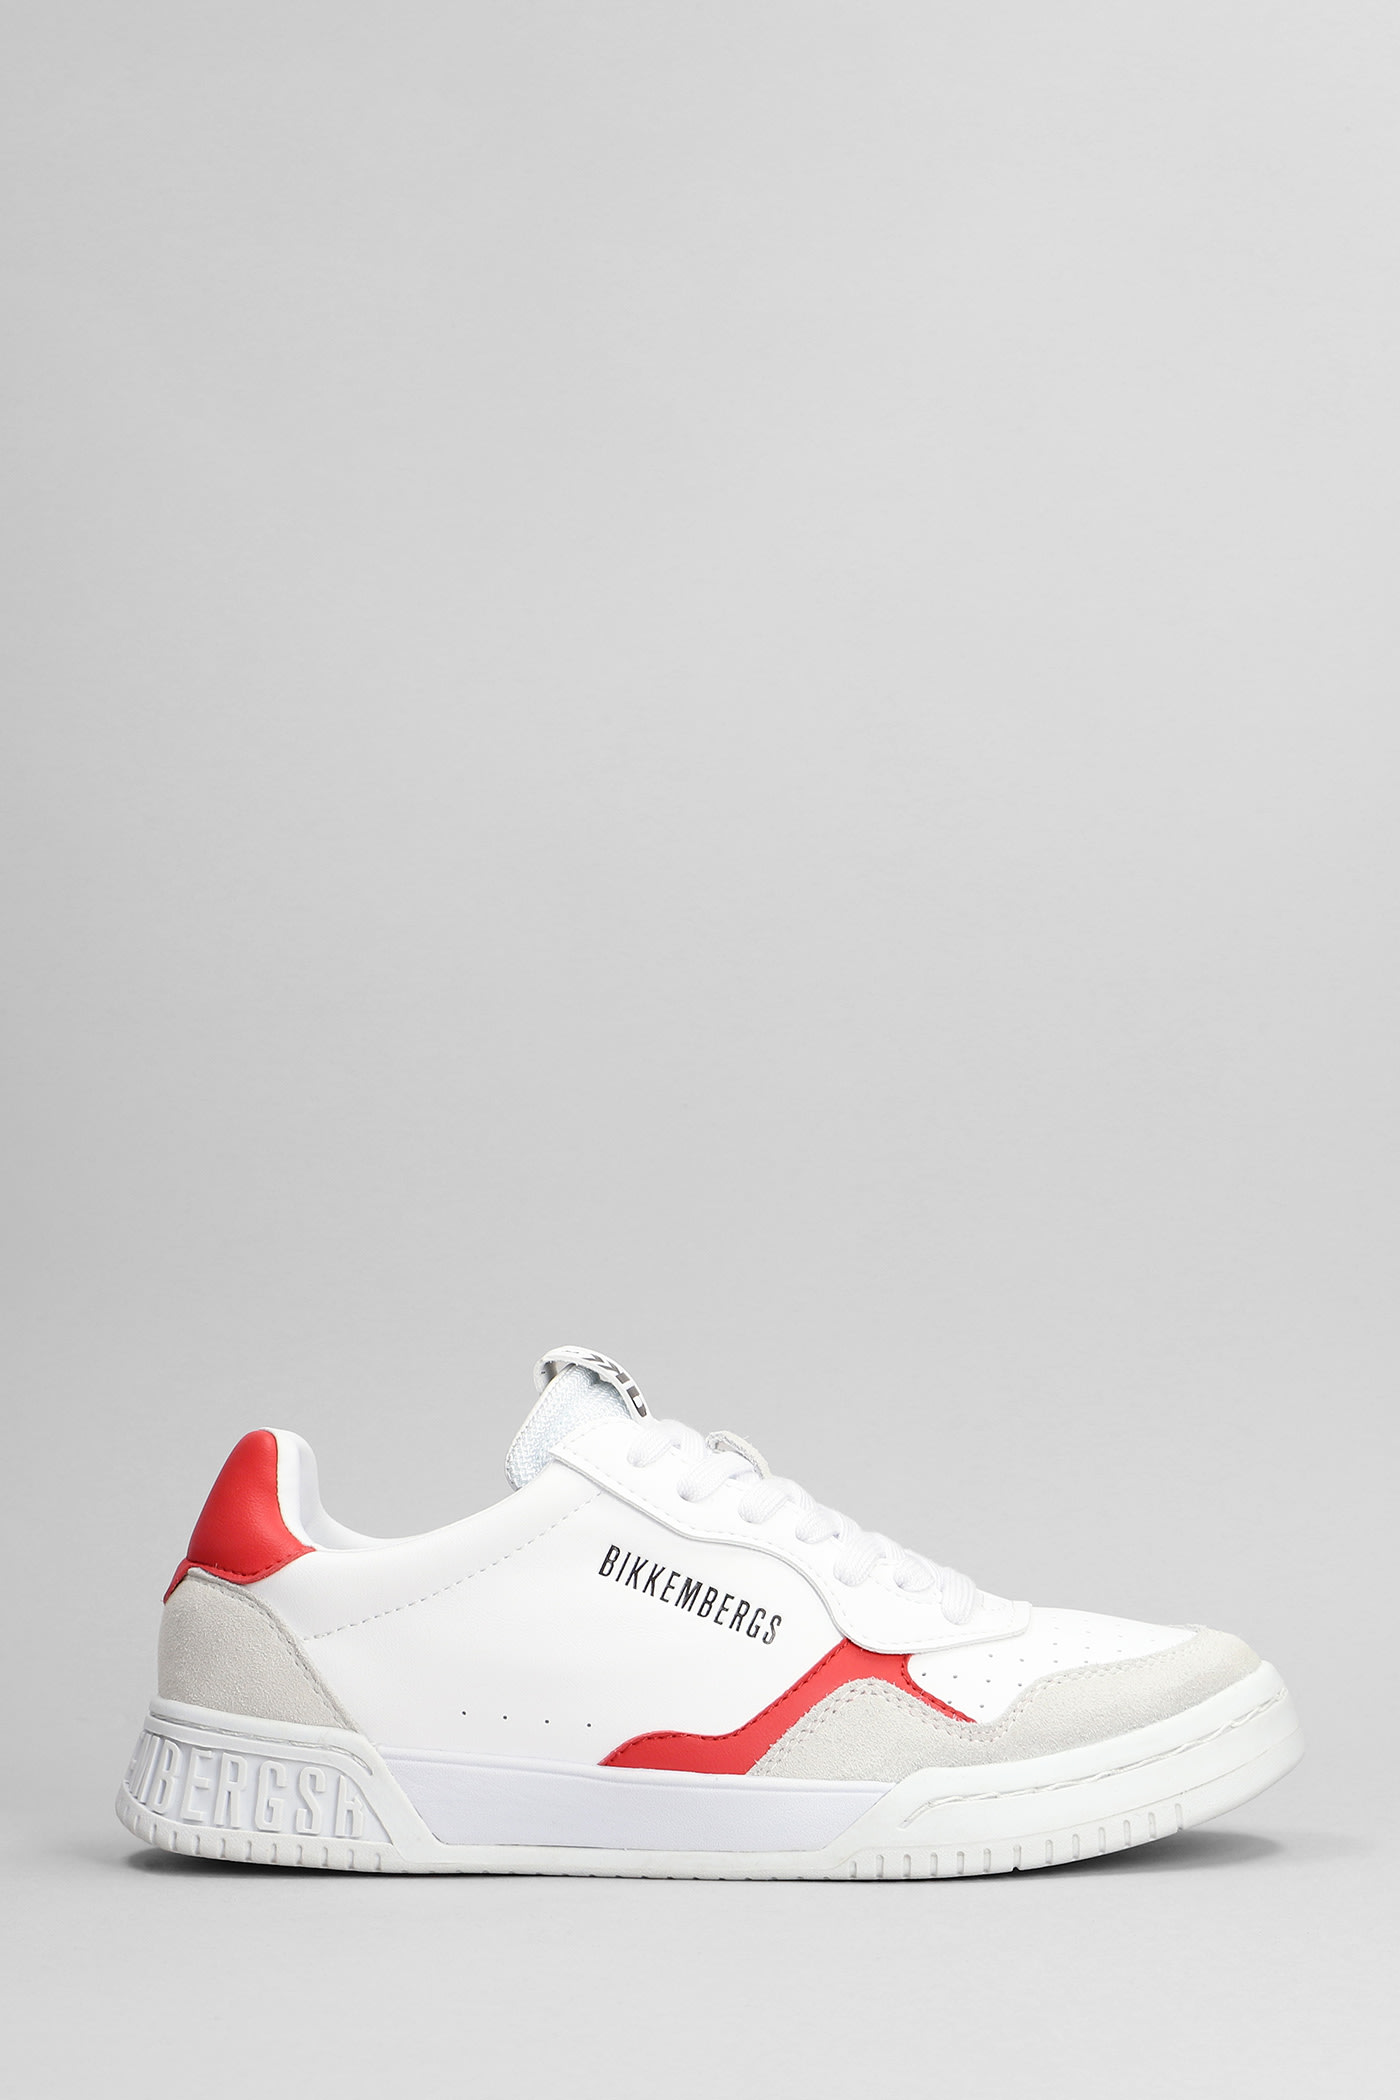 BIKKEMBERGS SNEAKERS IN WHITE SUEDE AND LEATHER